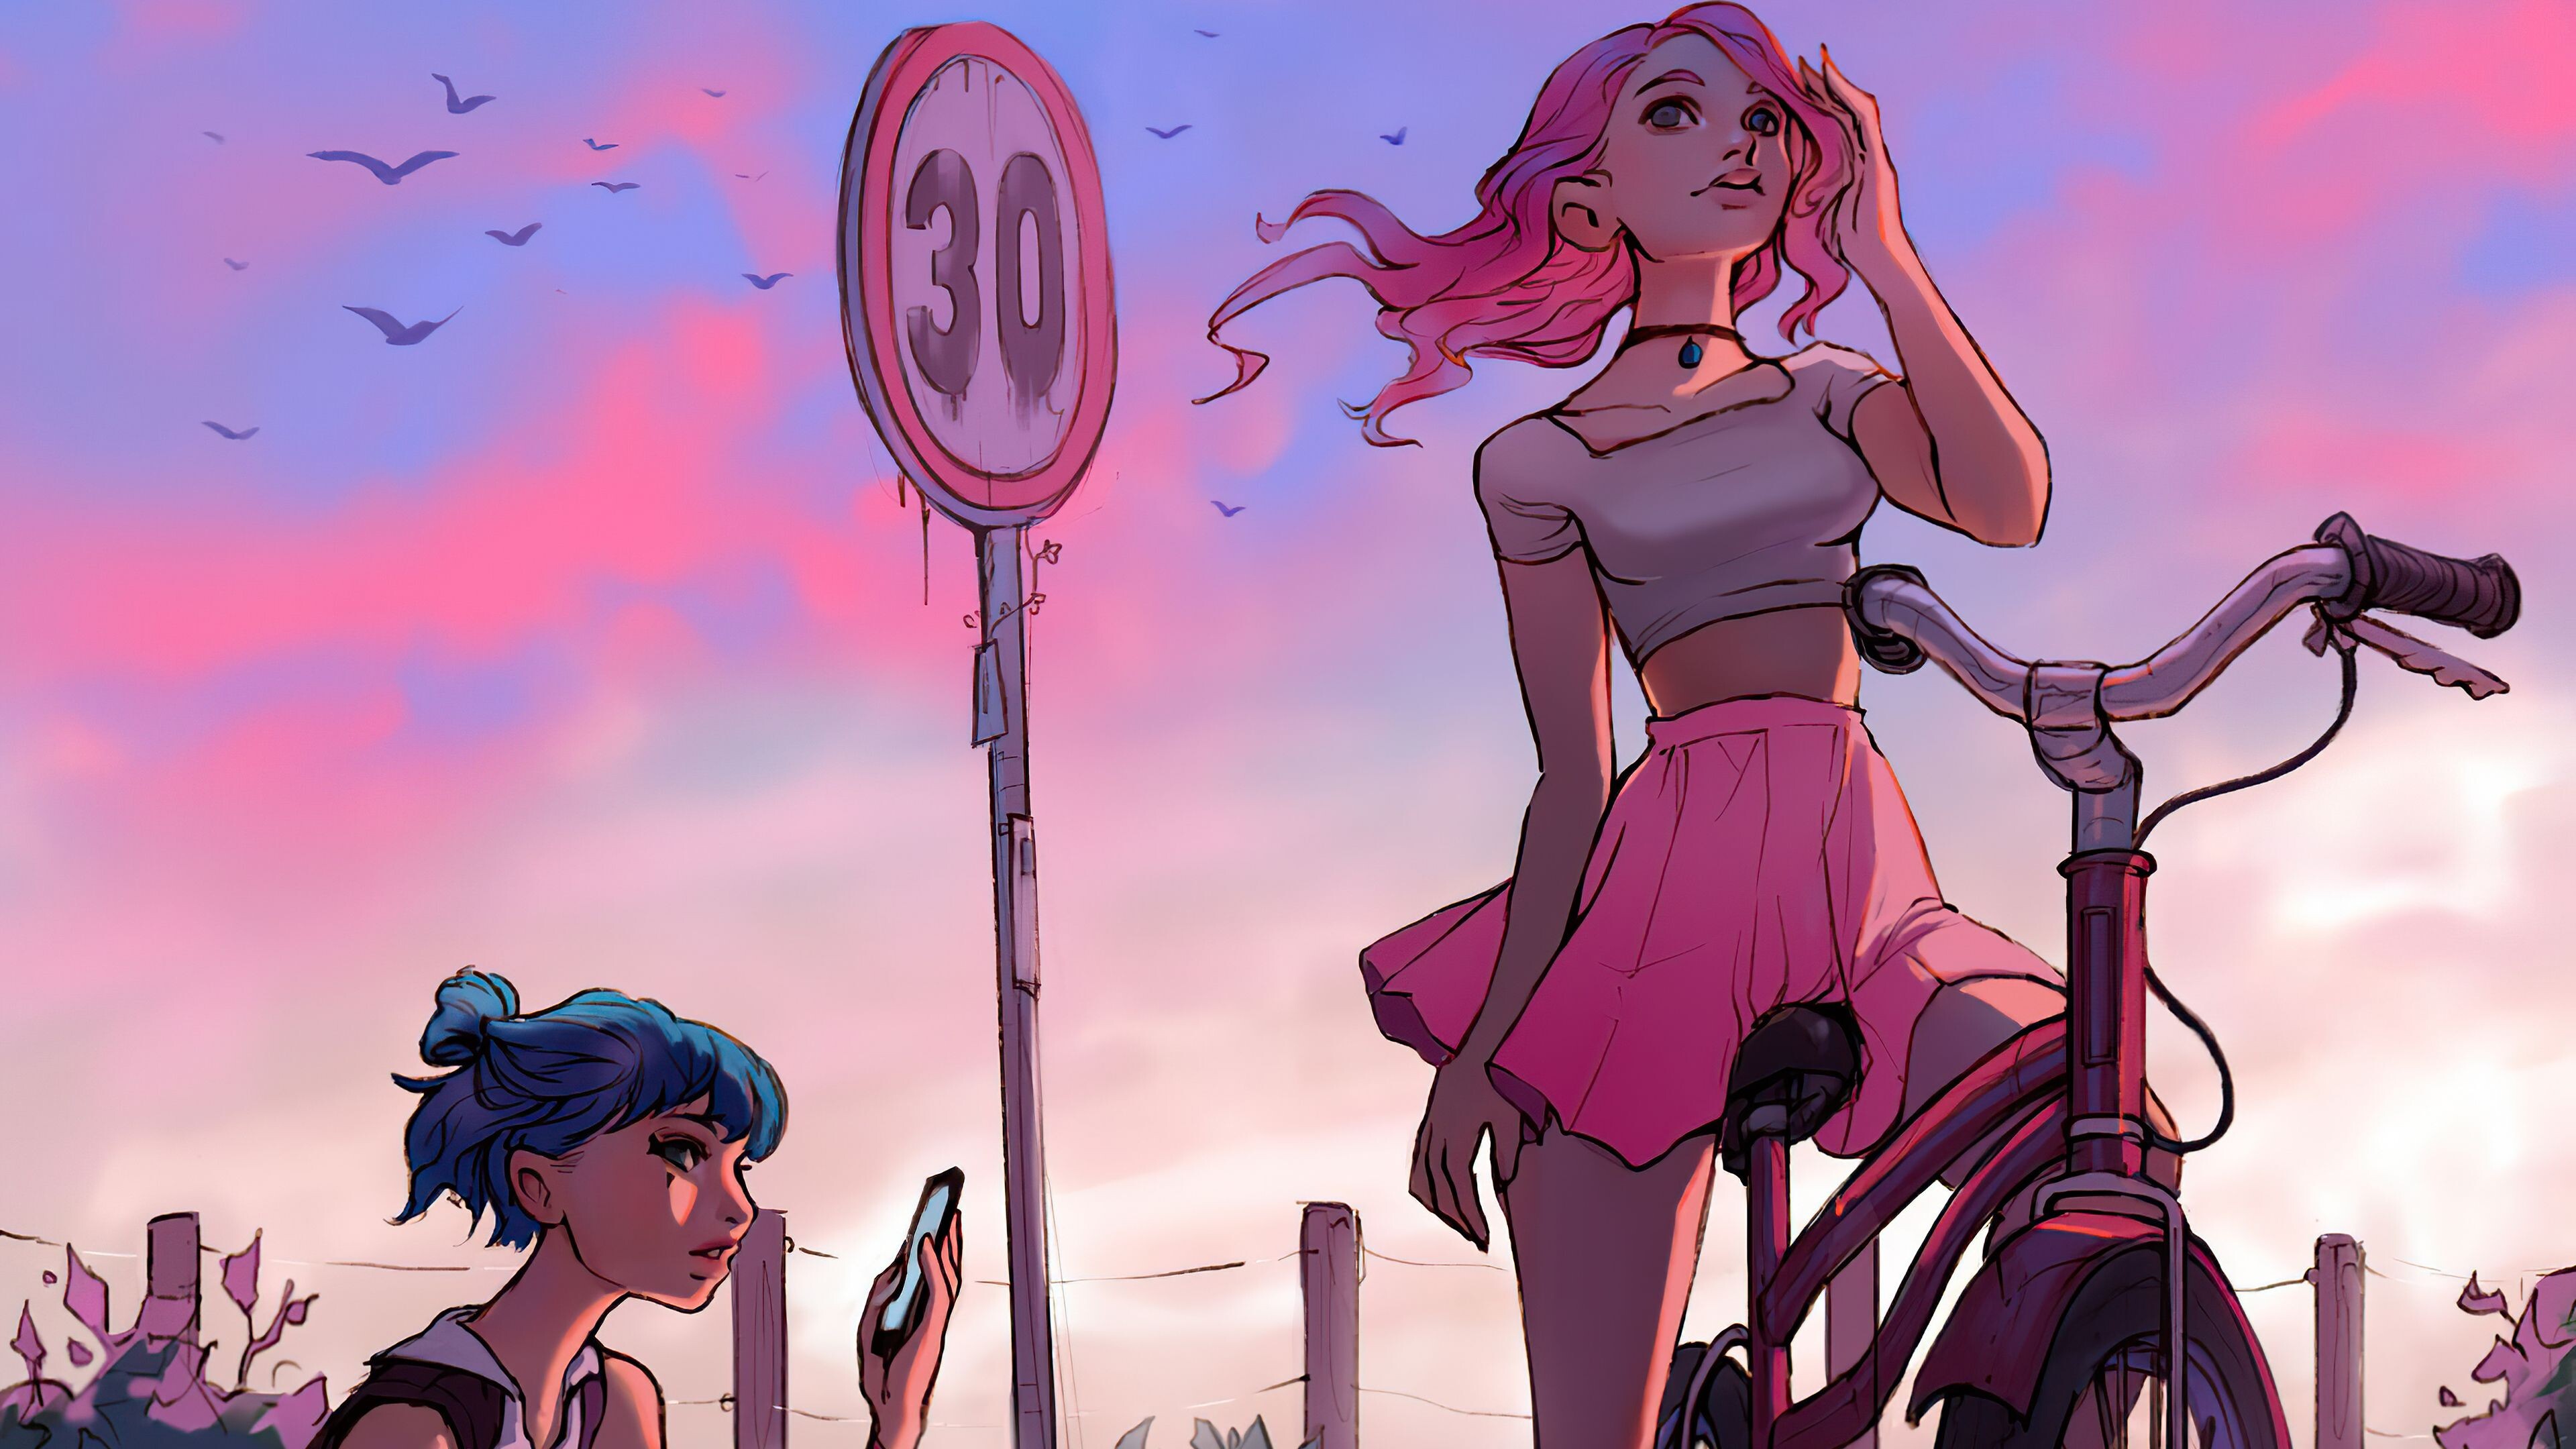 Girl and Bike: Anime, Cartoon characters, Pink and purple, Girl riding a bicycle. 3840x2160 4K Wallpaper.